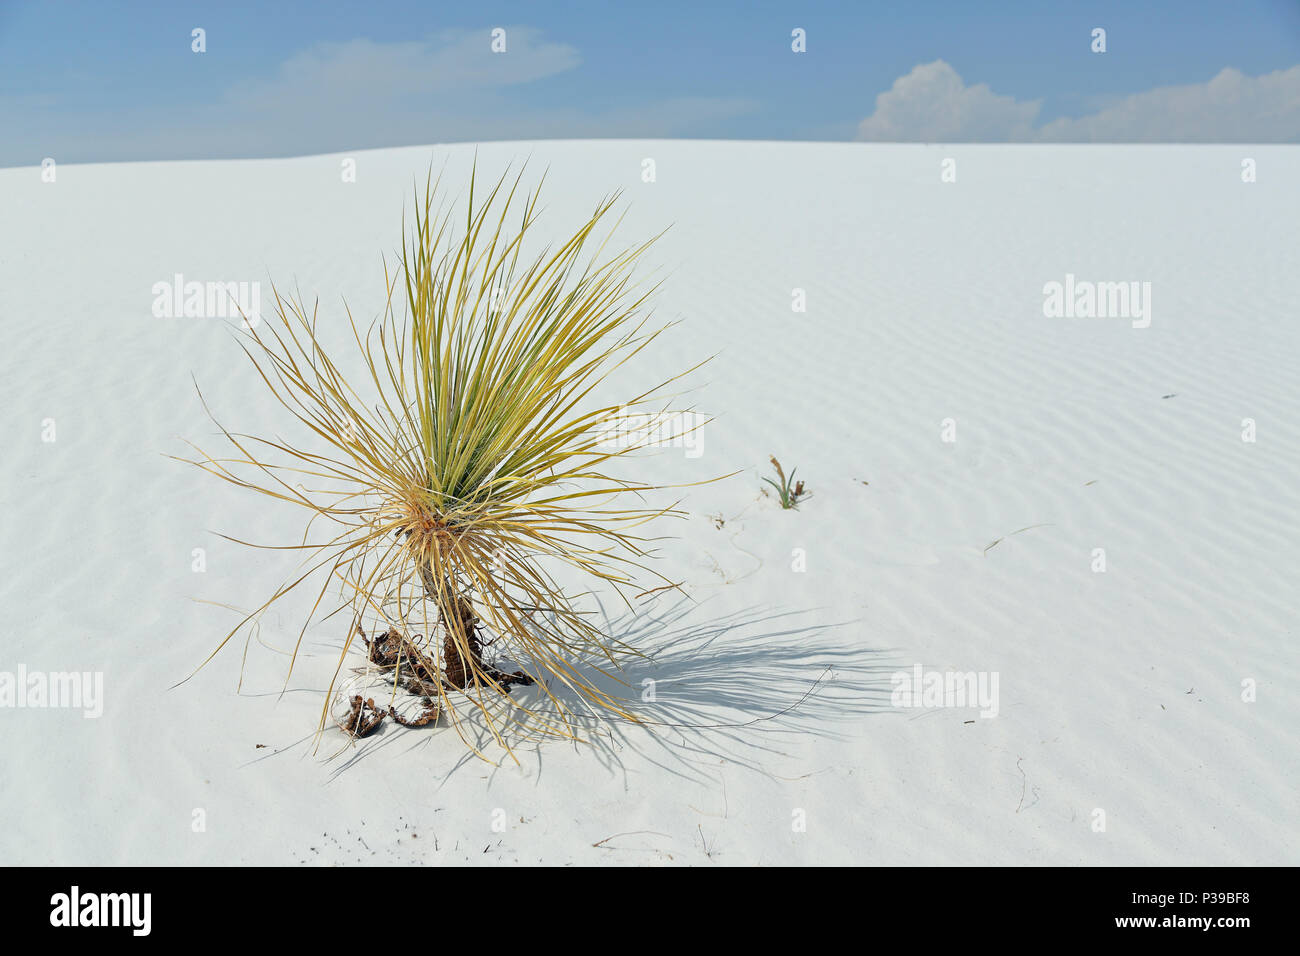 Yucca plant on brilliant white desert sand in southern New Mexico Stock Photo